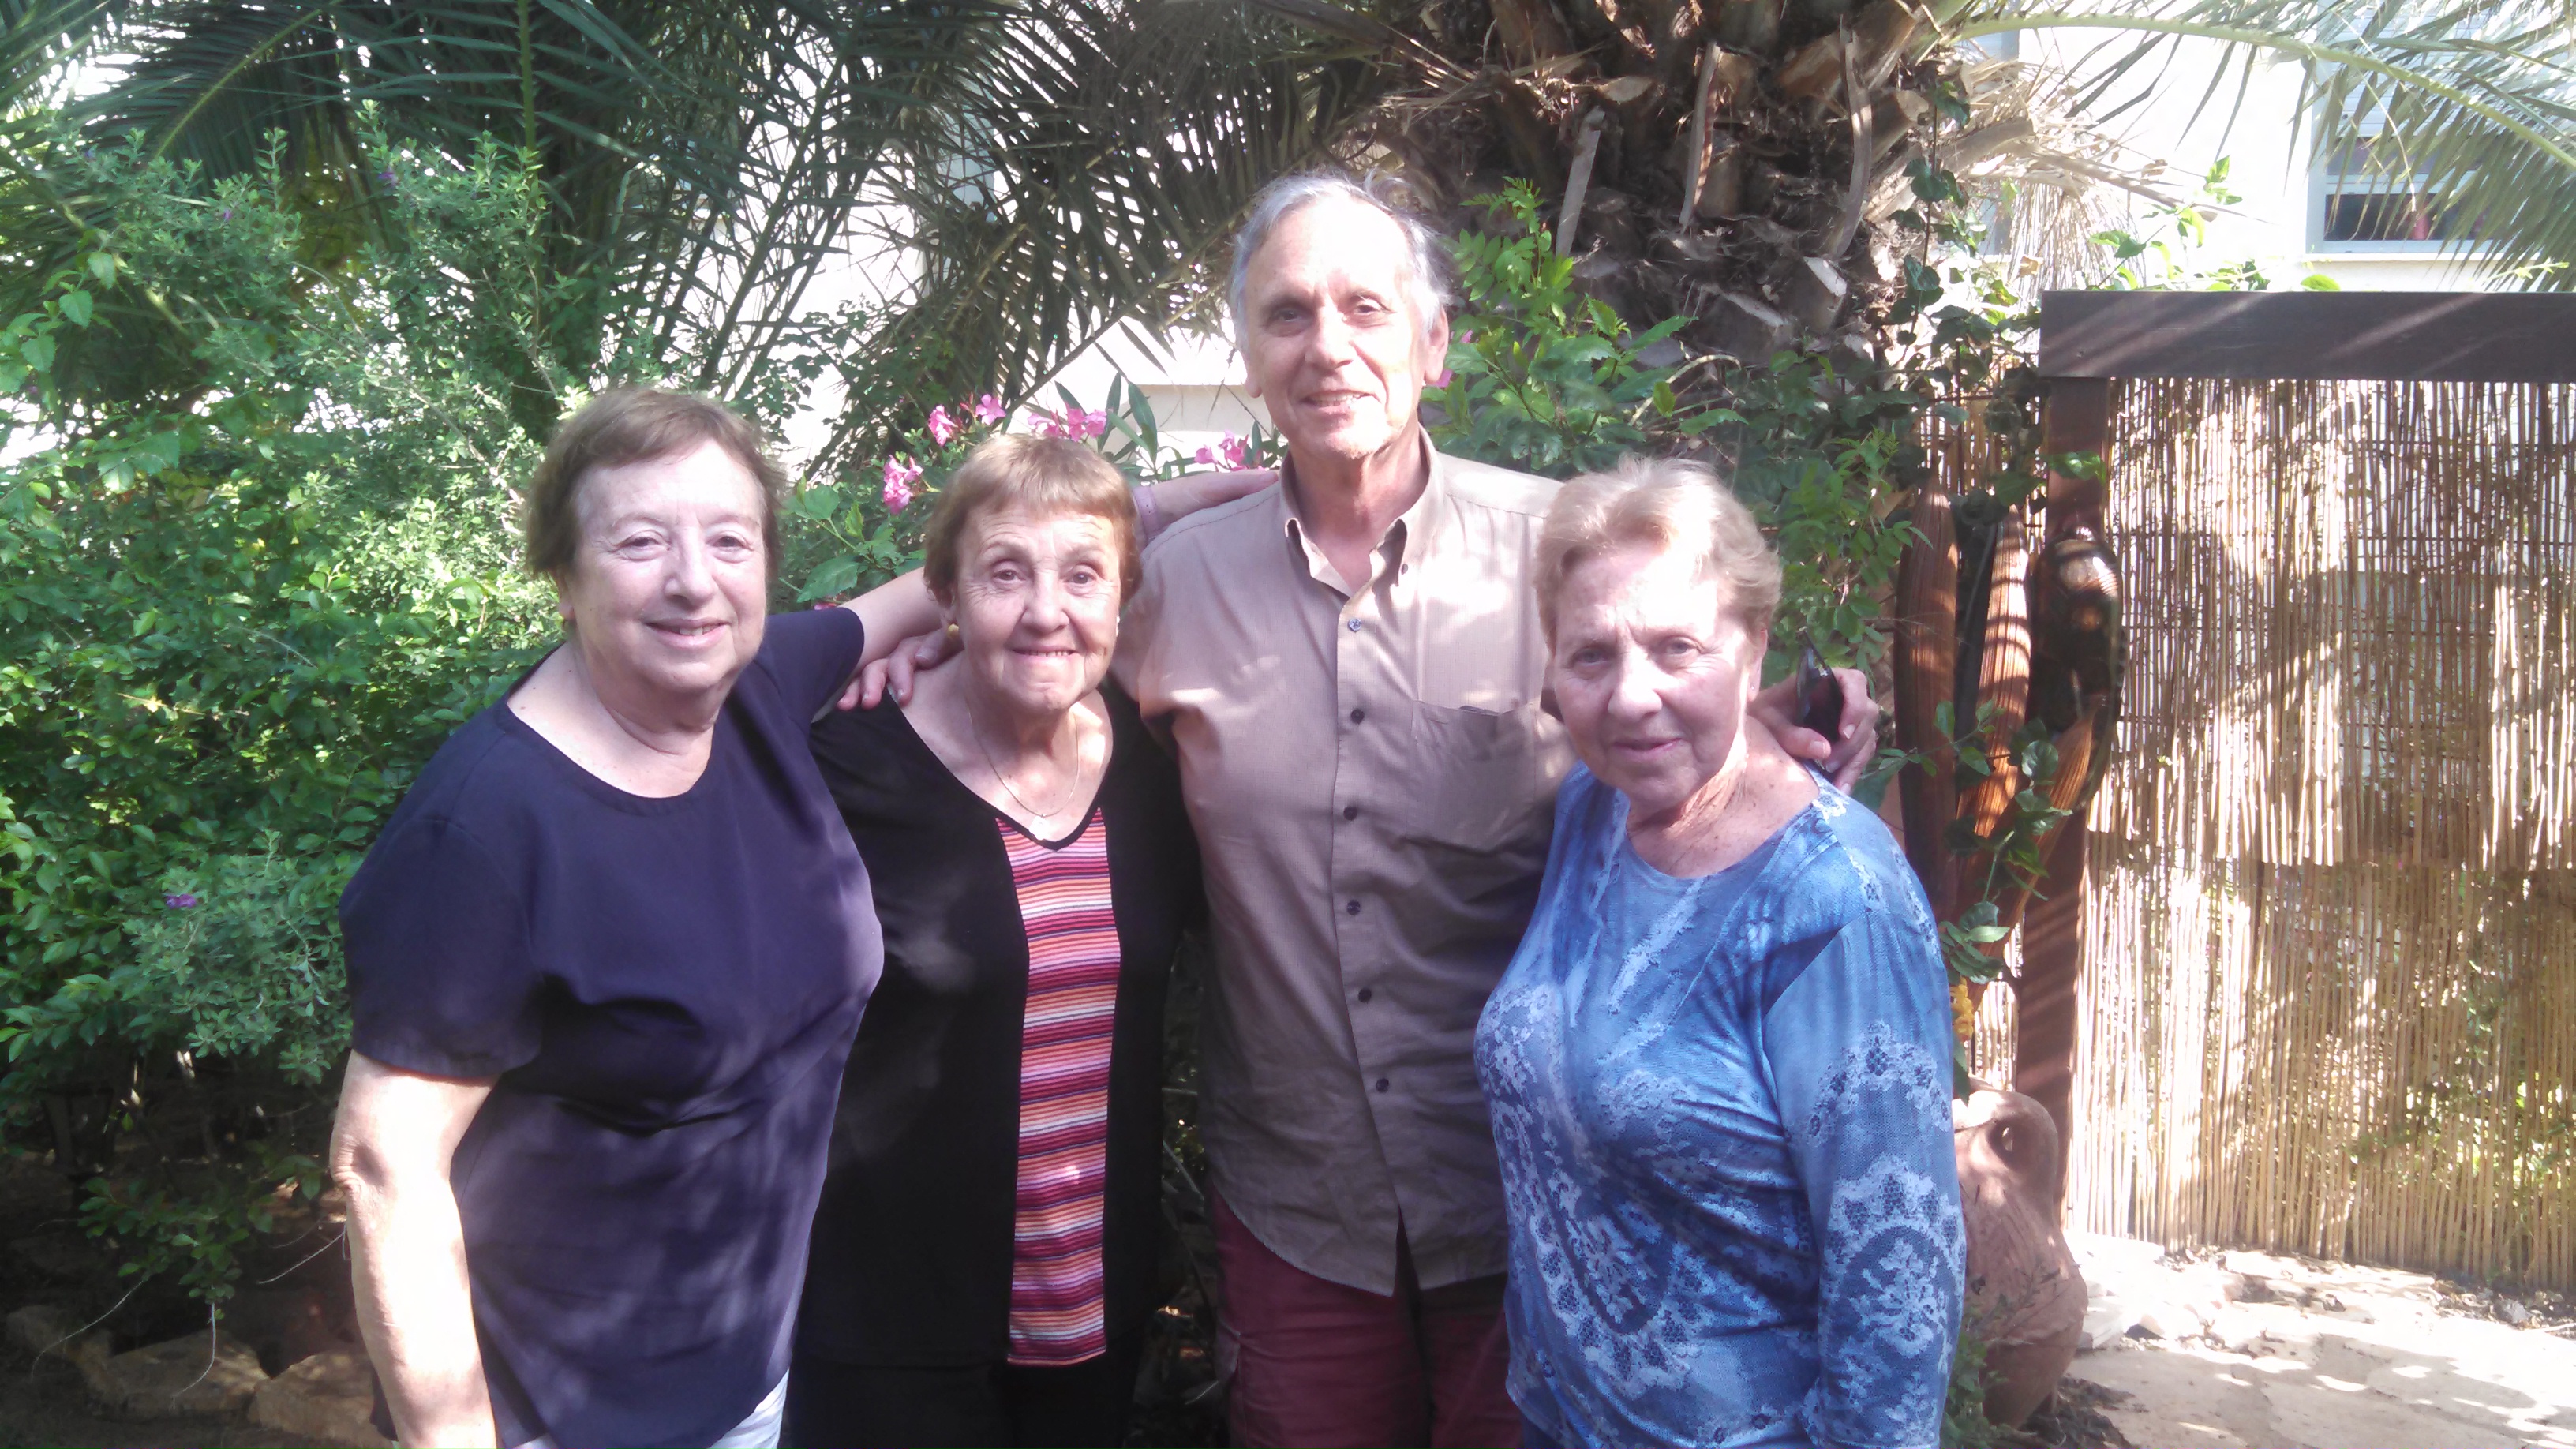 [Sisters of Leon Kanner, brother of Edward Joffe[[Photo by William Jacobson, May 2015, Israel]